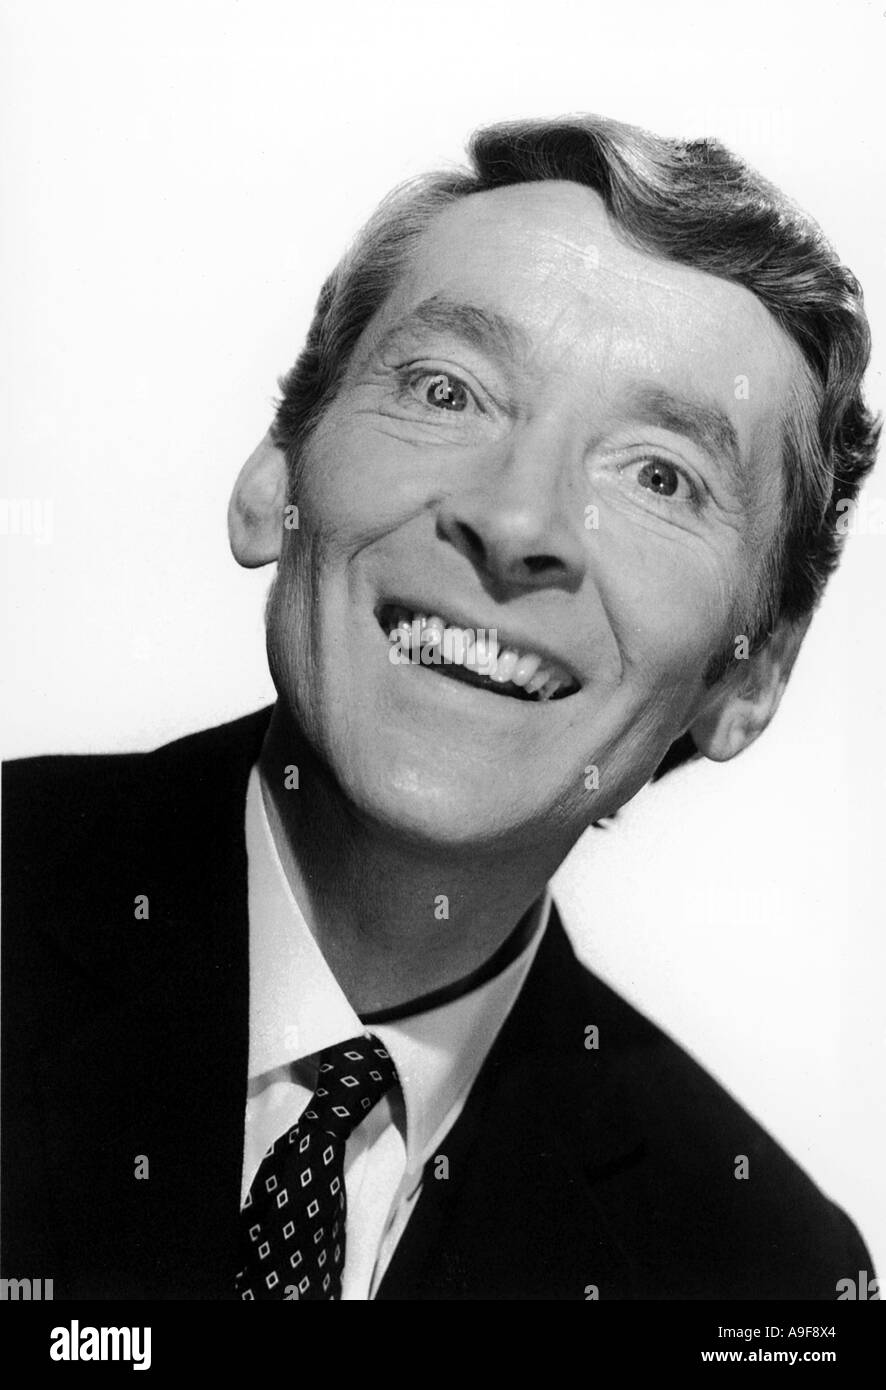 KENNETH WILLIAMS UK comedy actor Stock Photo